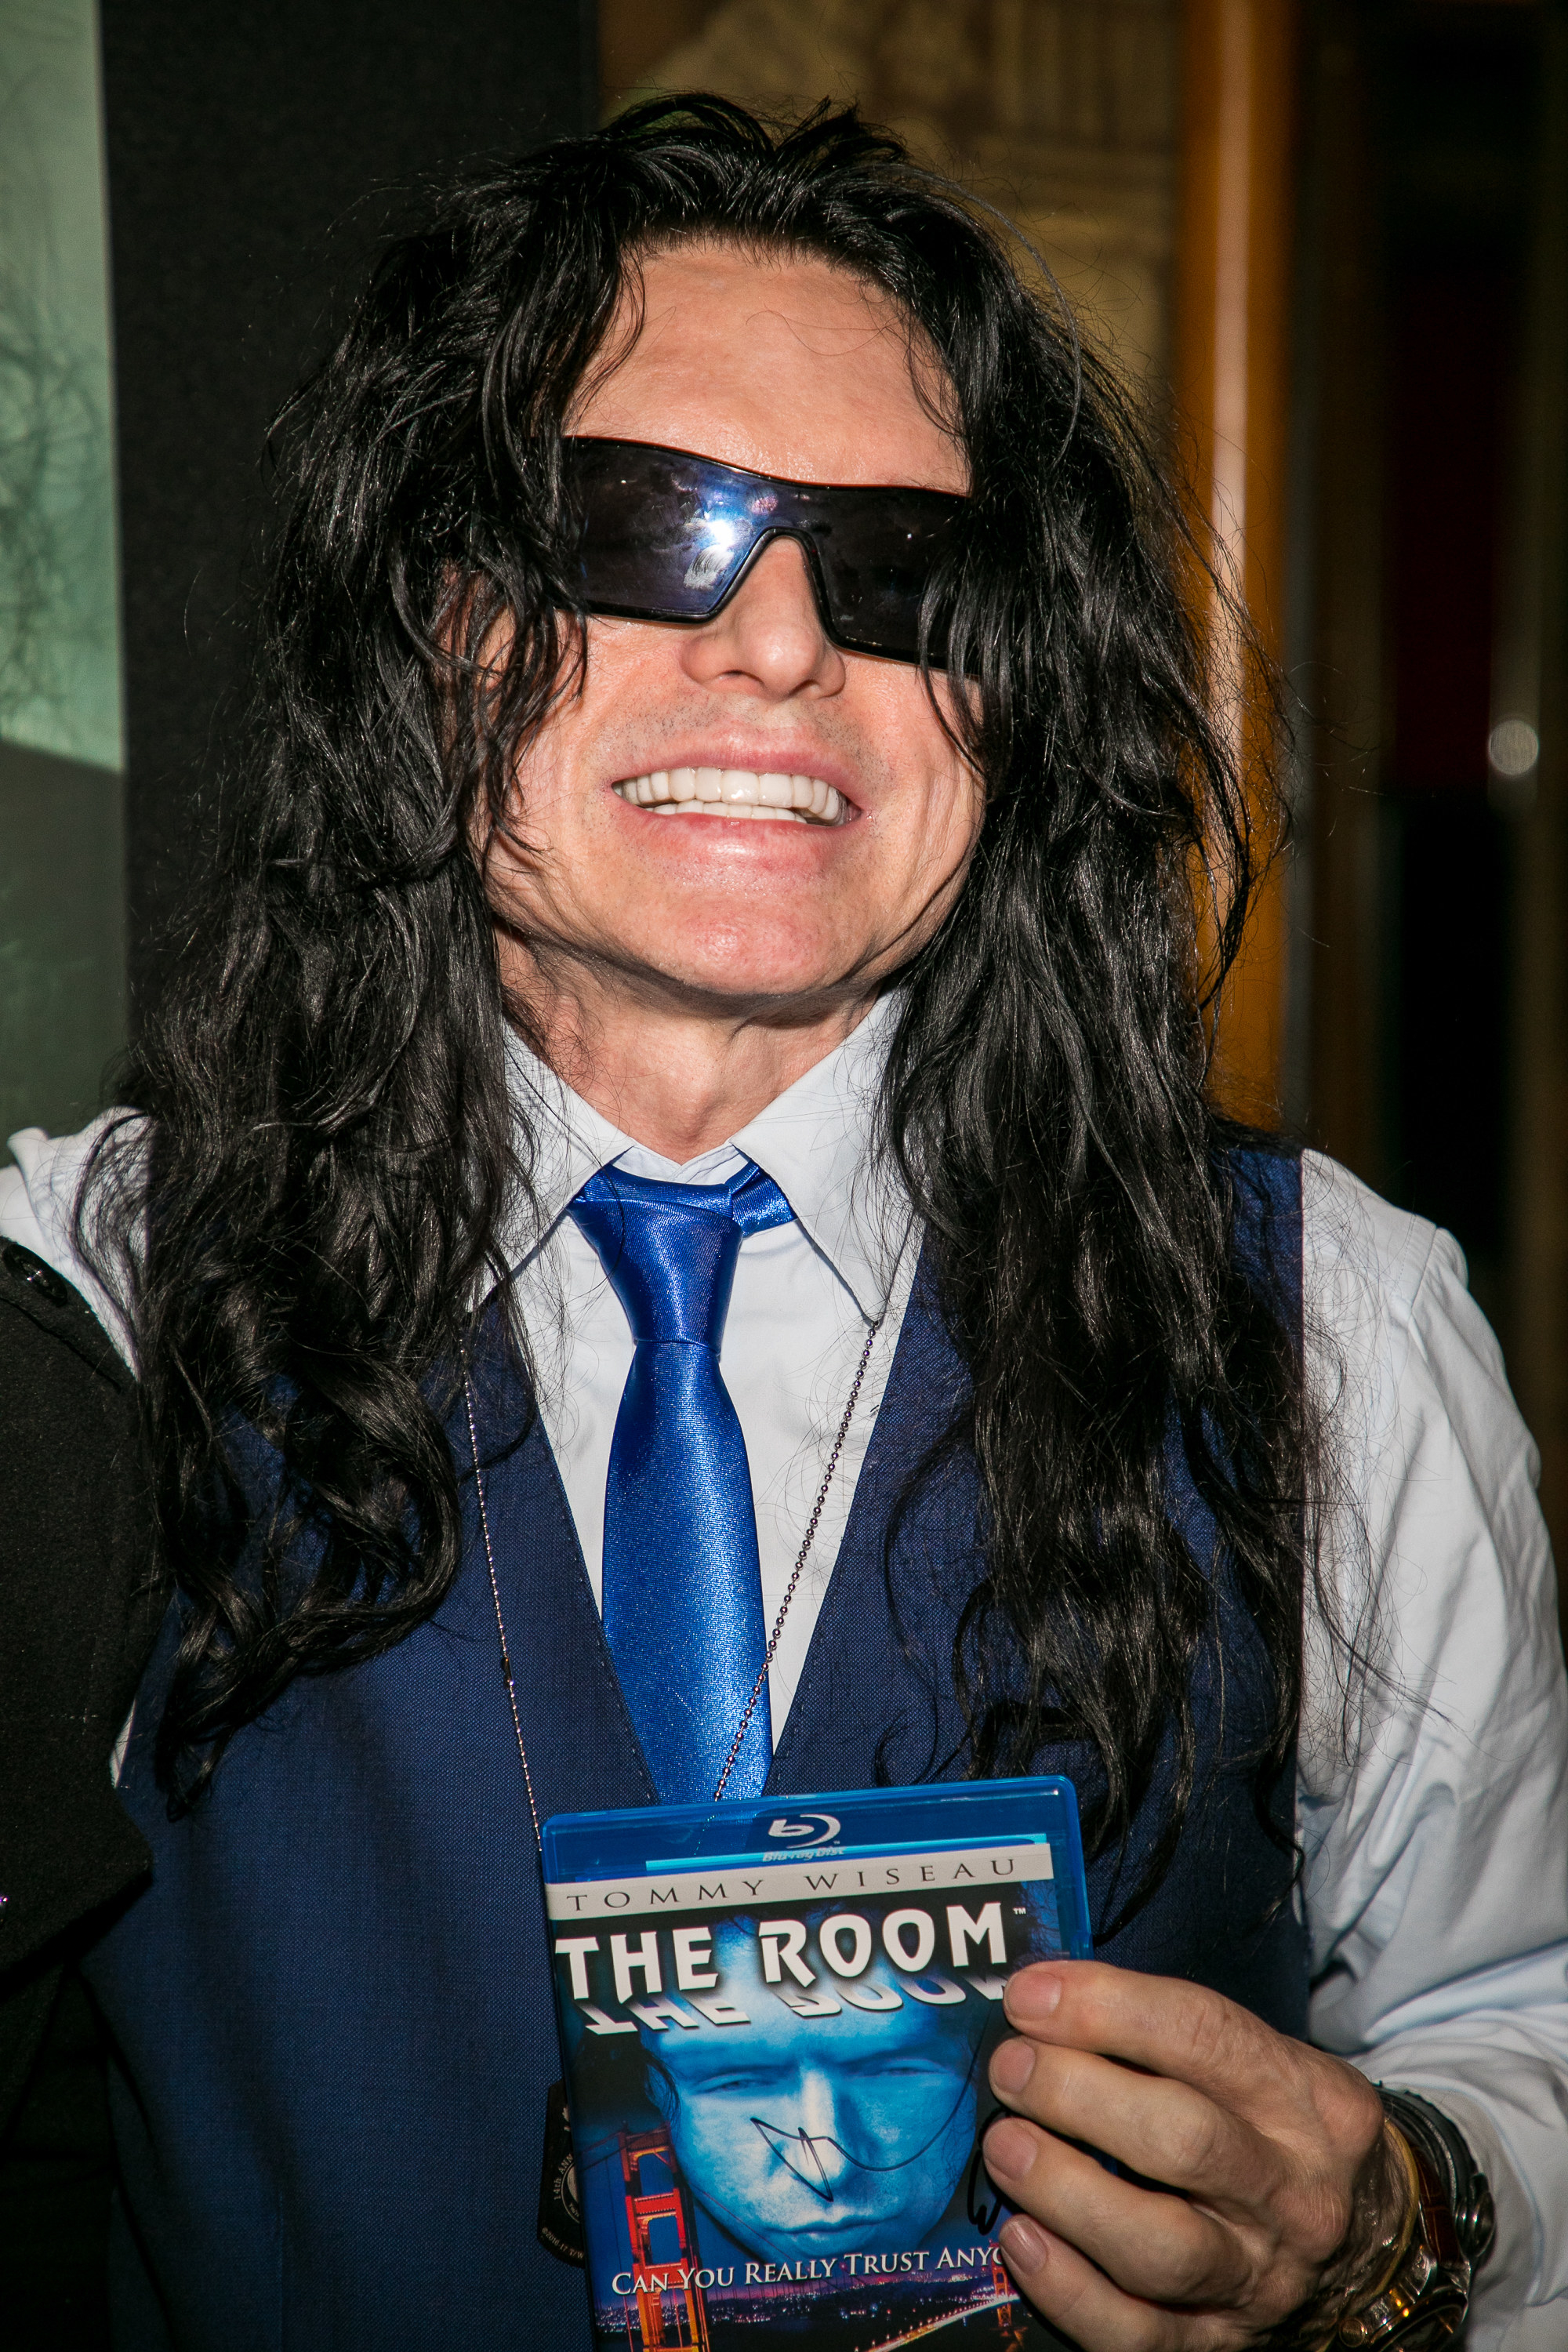 Tommy Wiseau smiling and holding a blu-ray copy of The Room